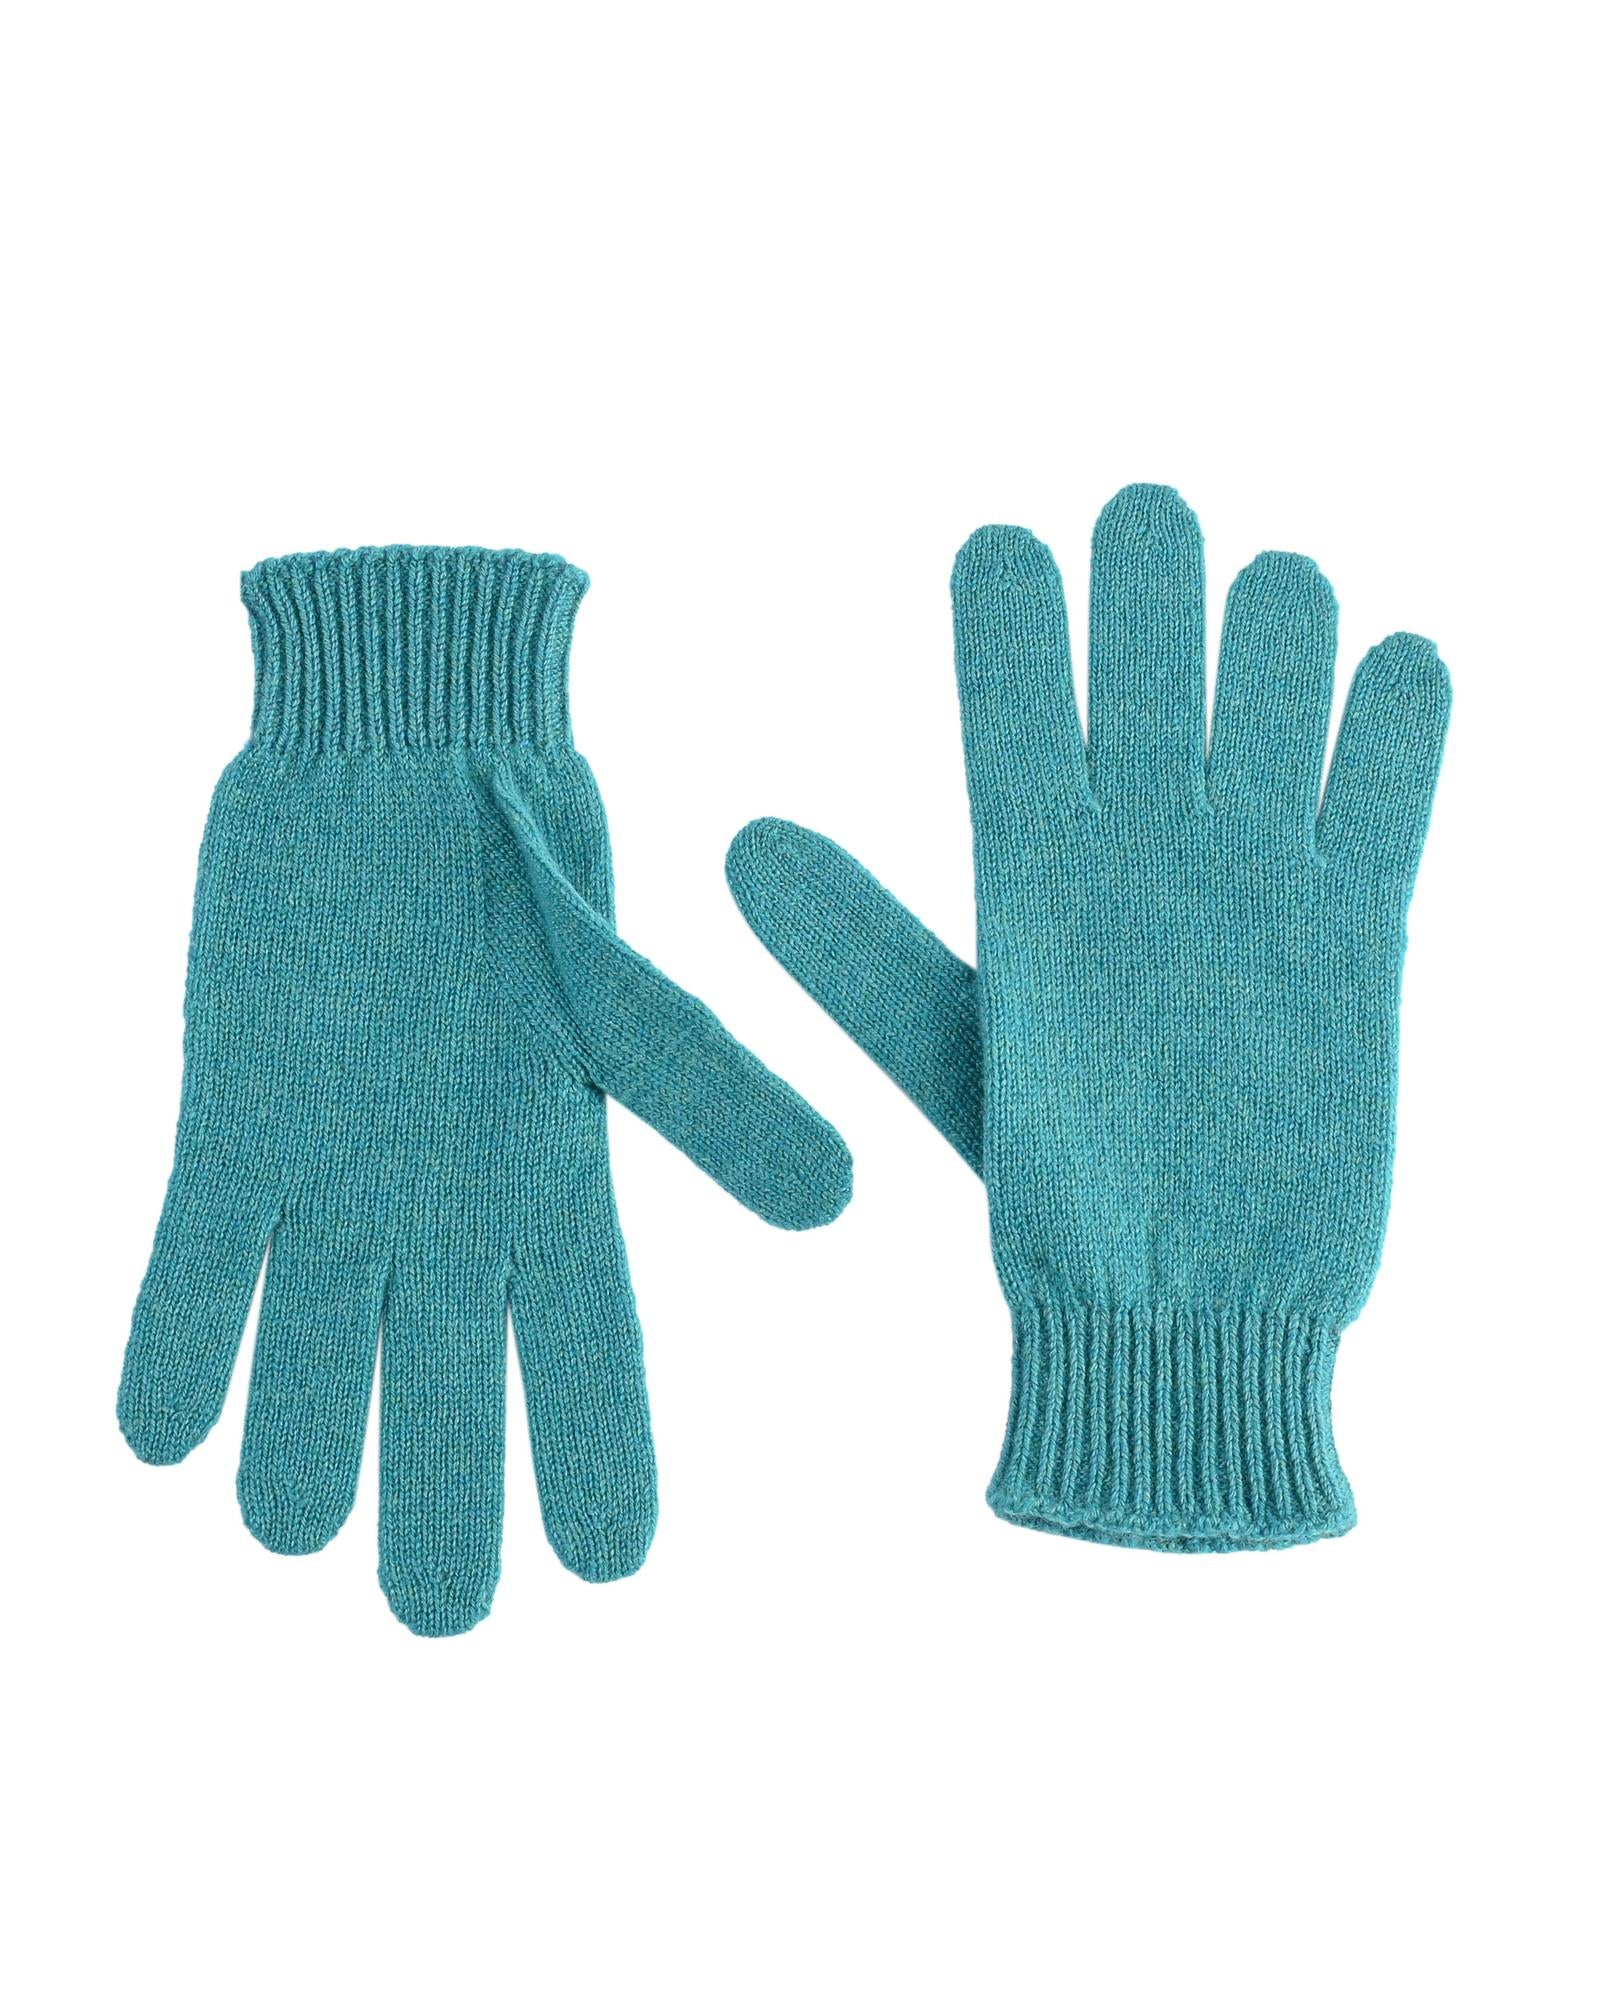 Women's Luxury Cashmere Womens Short Gloves in Turquoise - M